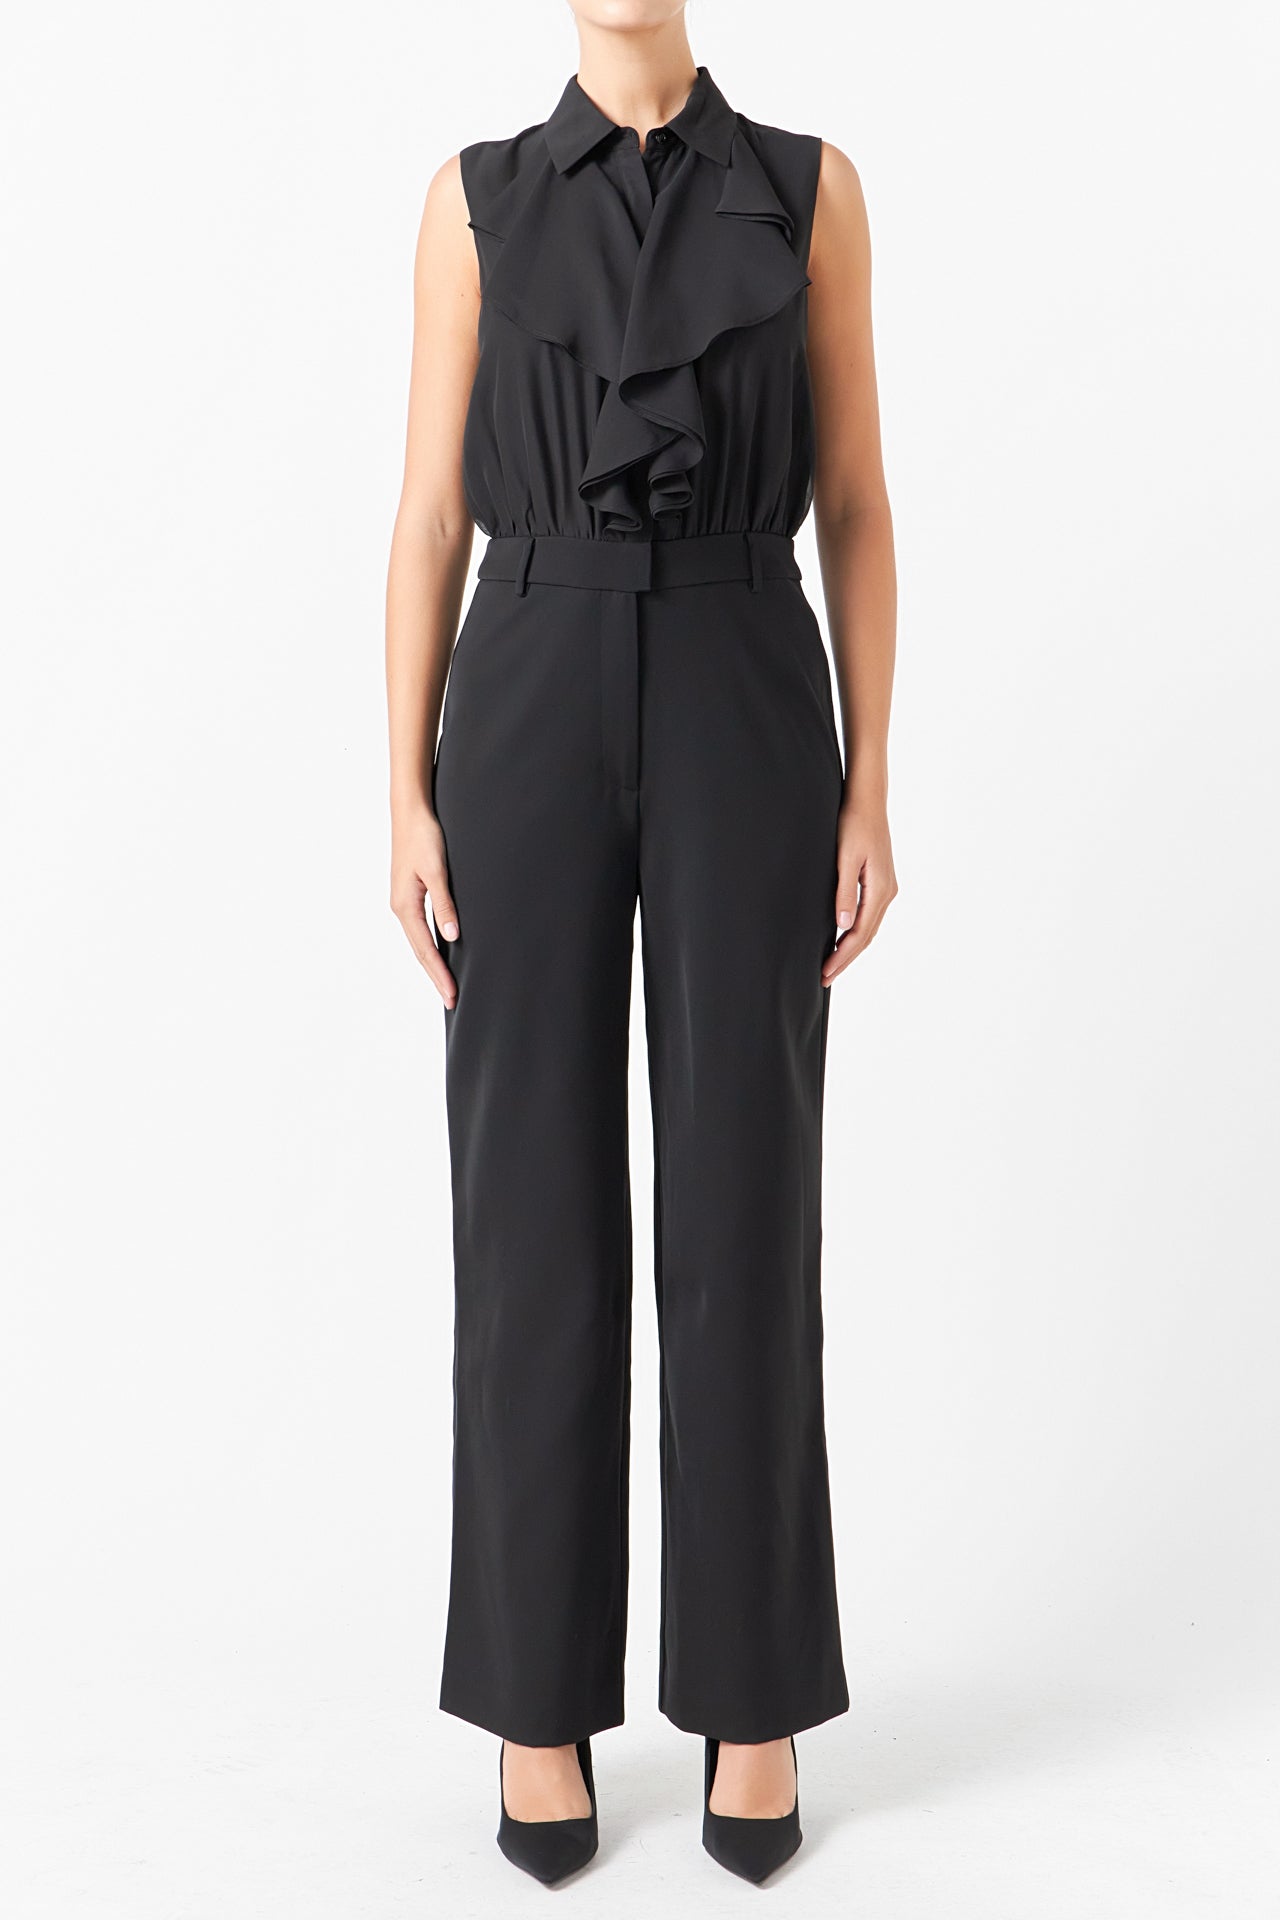 ENDLESS ROSE - Sleeveless Ruffle Jumpsuit - JUMPSUITS available at Objectrare